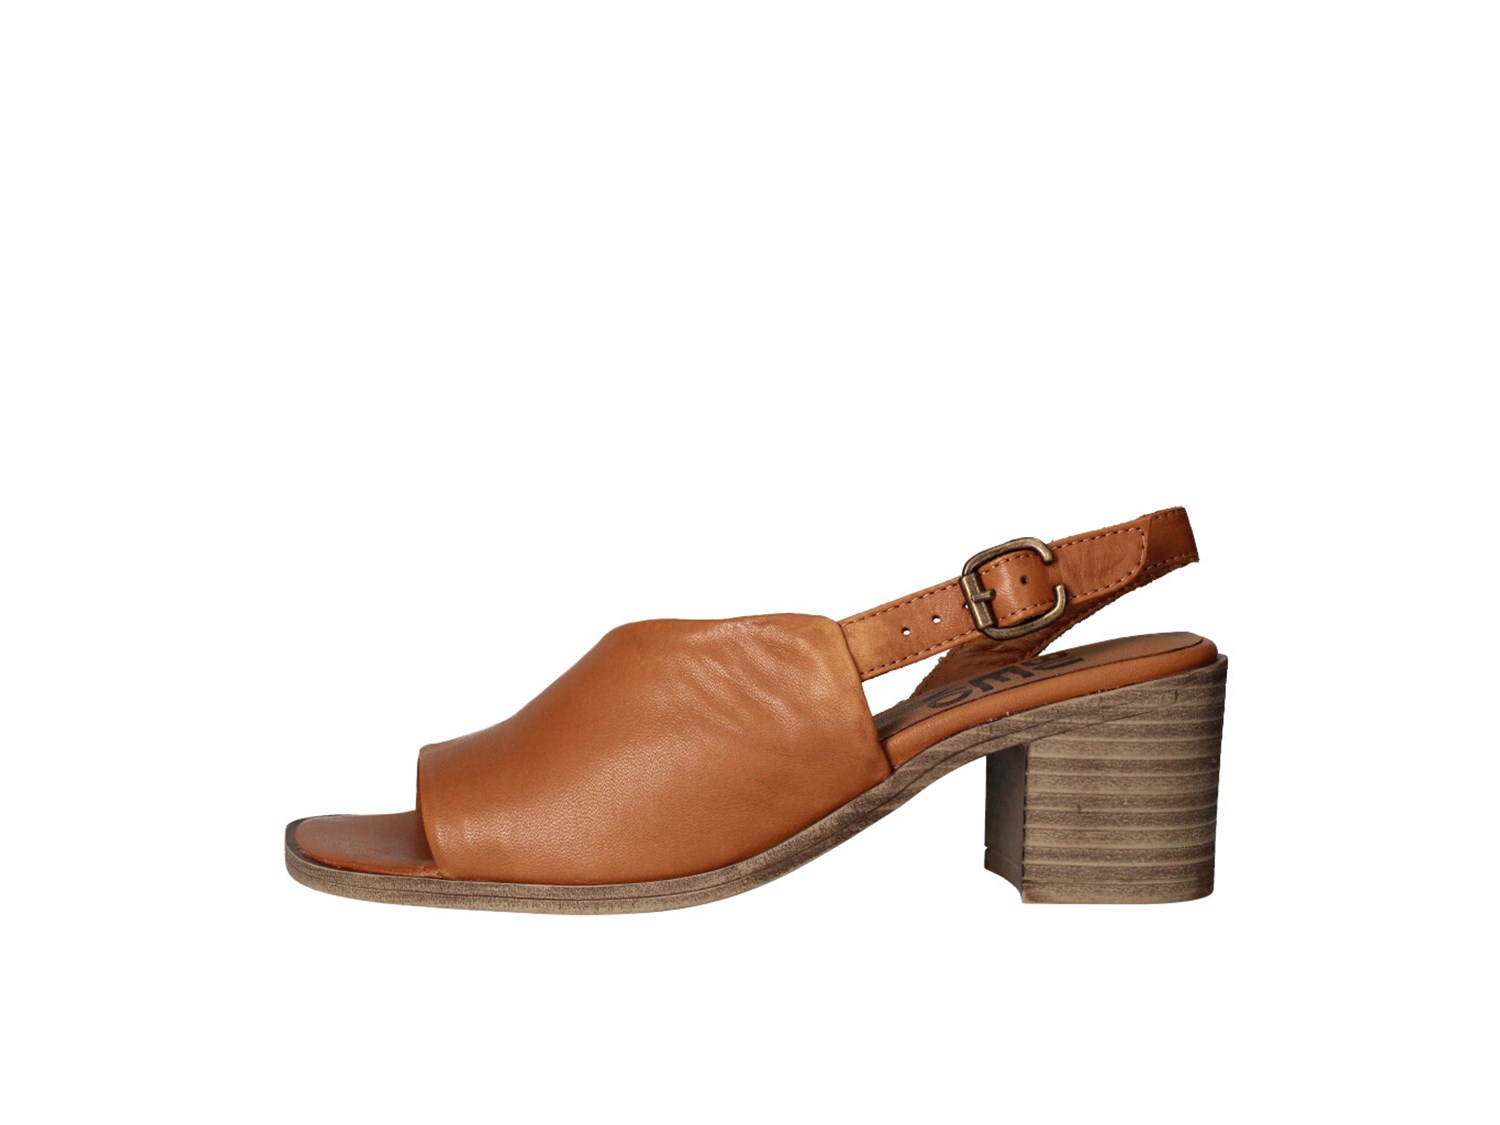 Bueno Wy4900 Leather Shoes Women Sandal